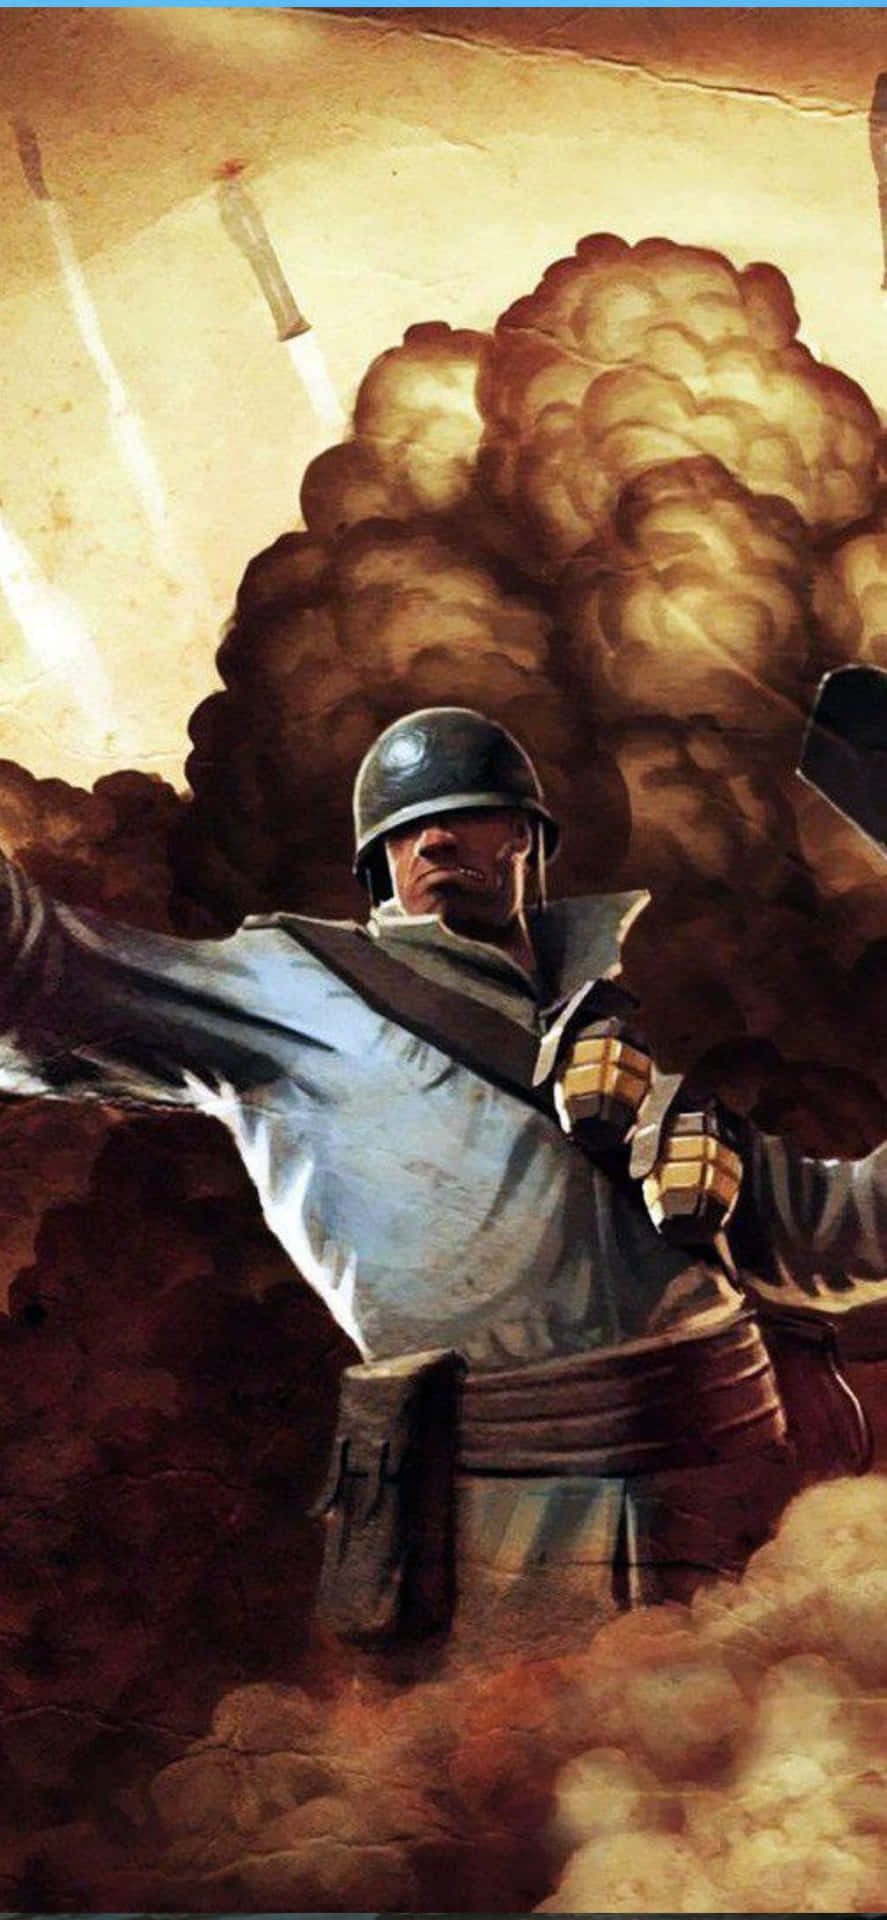 Iphone Xs Tf2 Background The Blue Soldier With Explosive Background